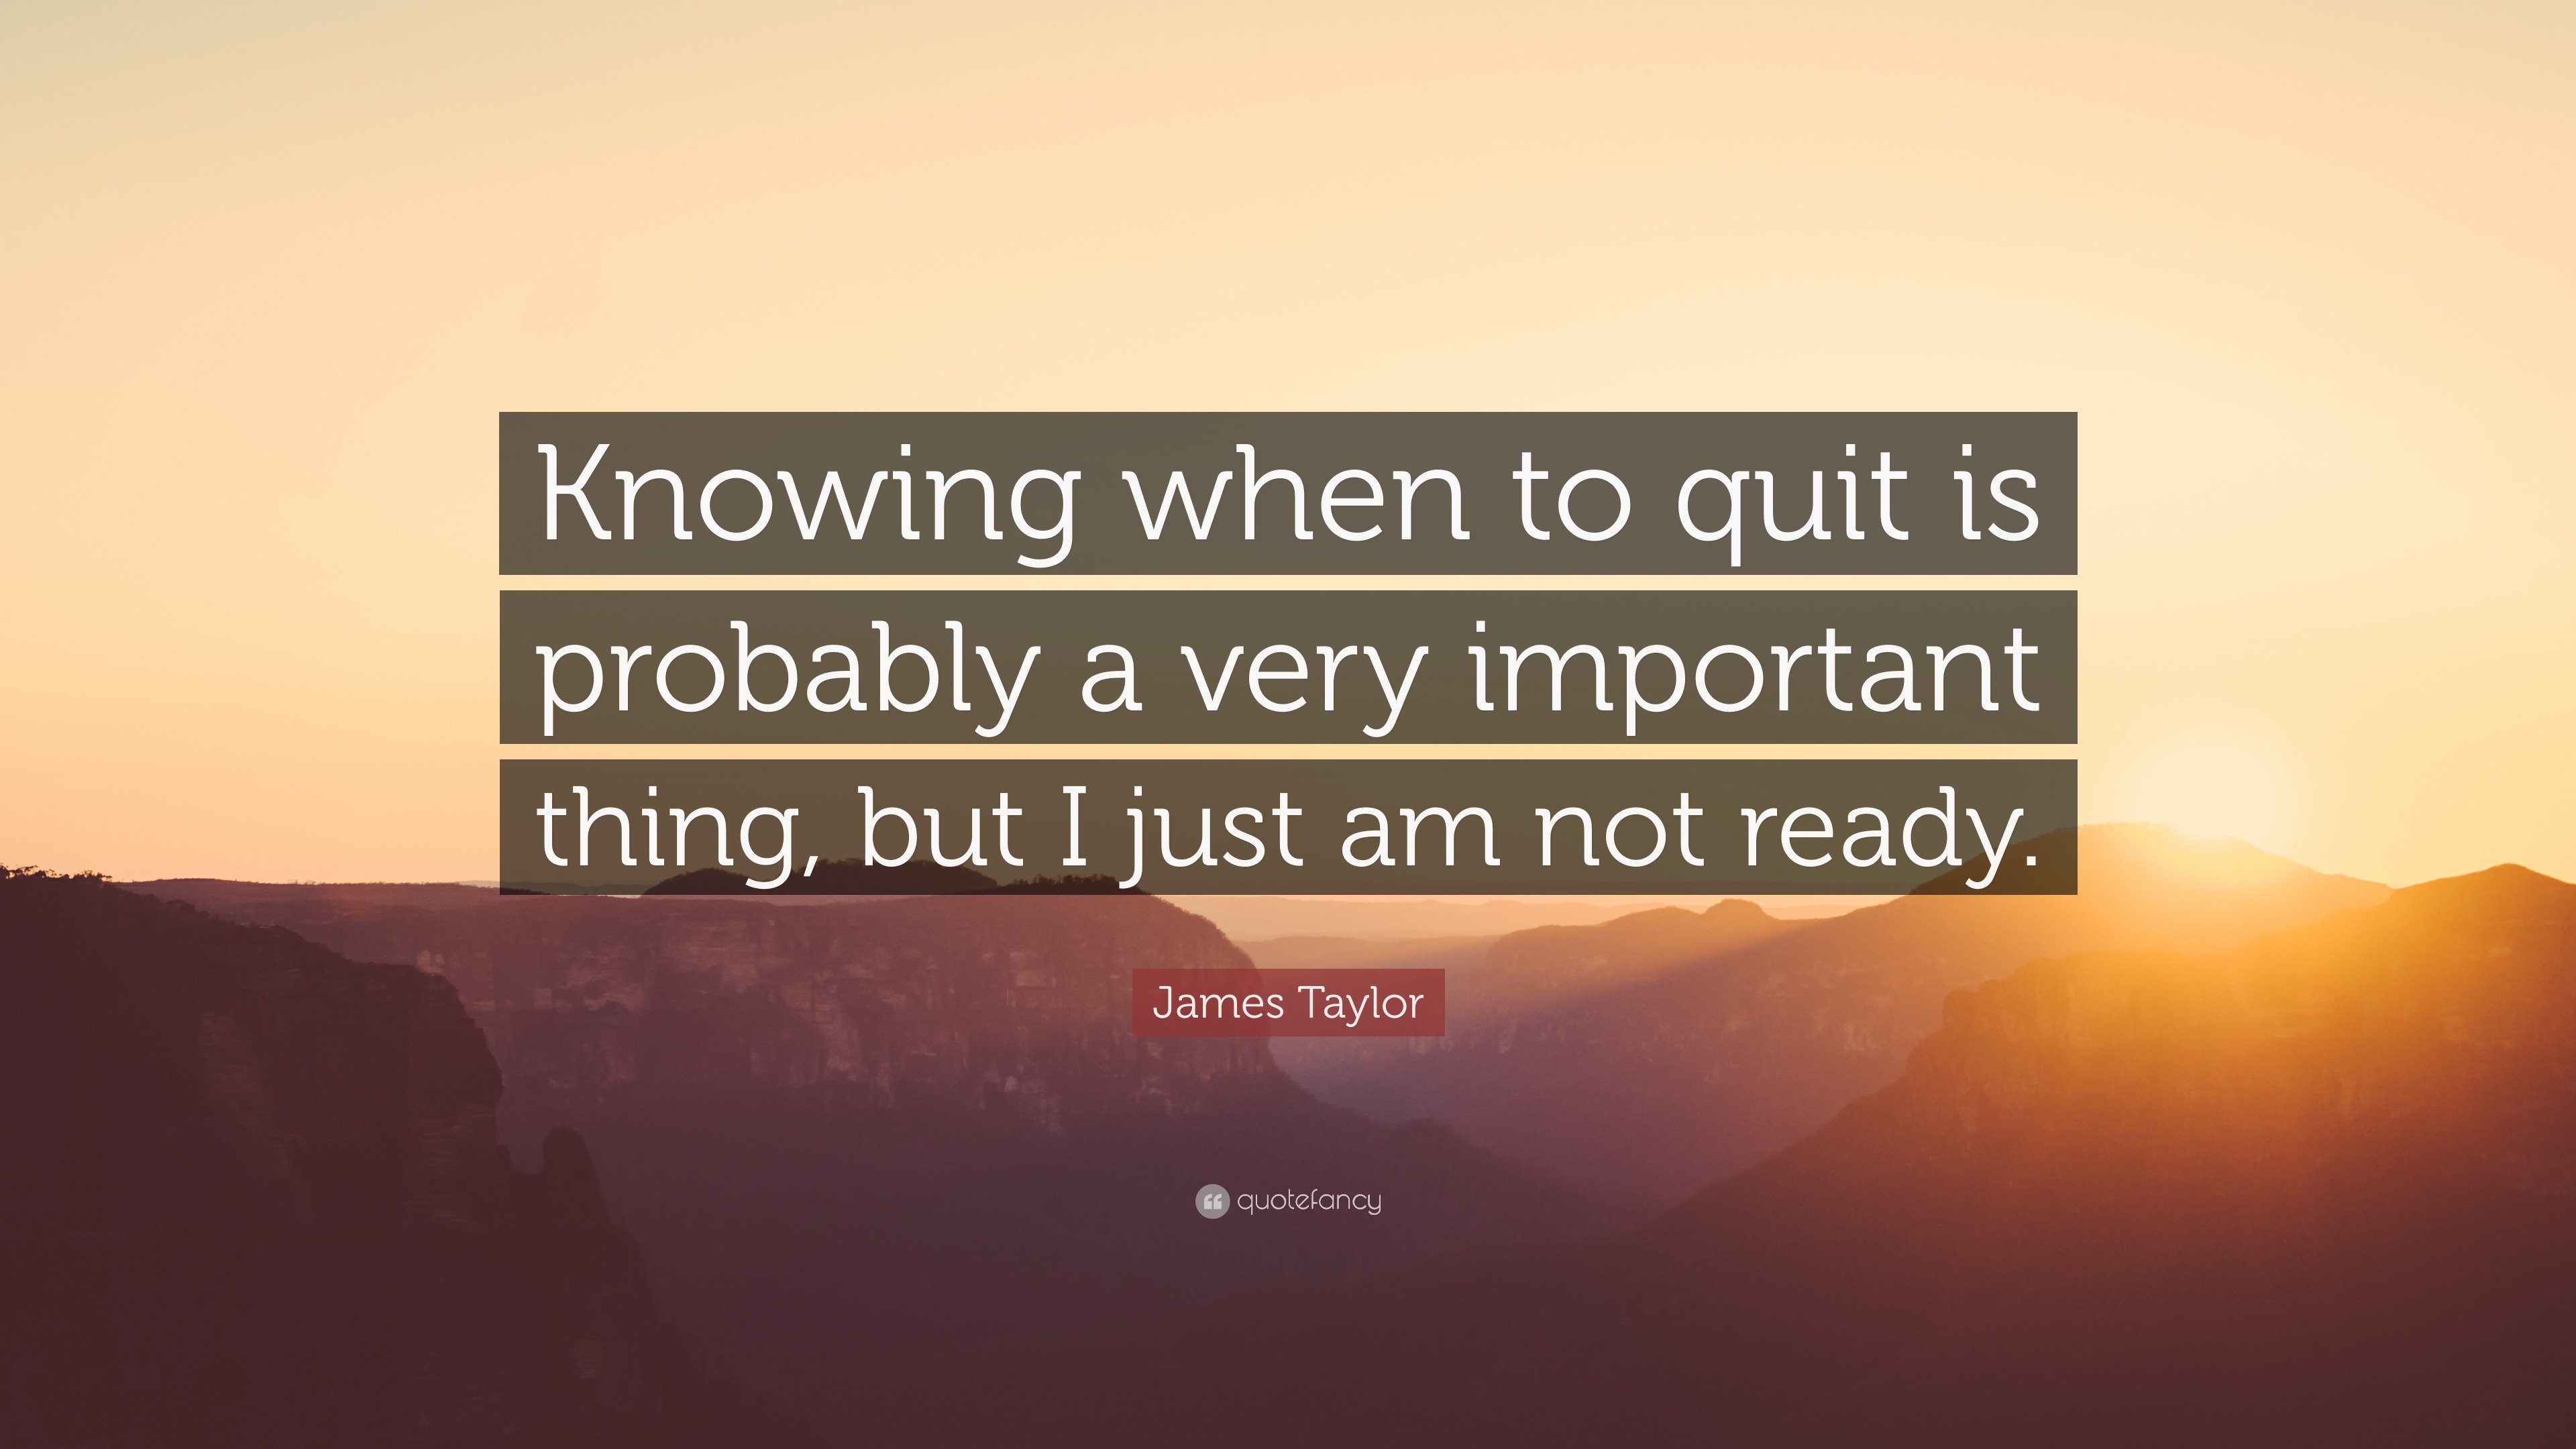 James Taylor Quote: “Knowing When To Quit Is Probably A Very Important Thing, But I Just